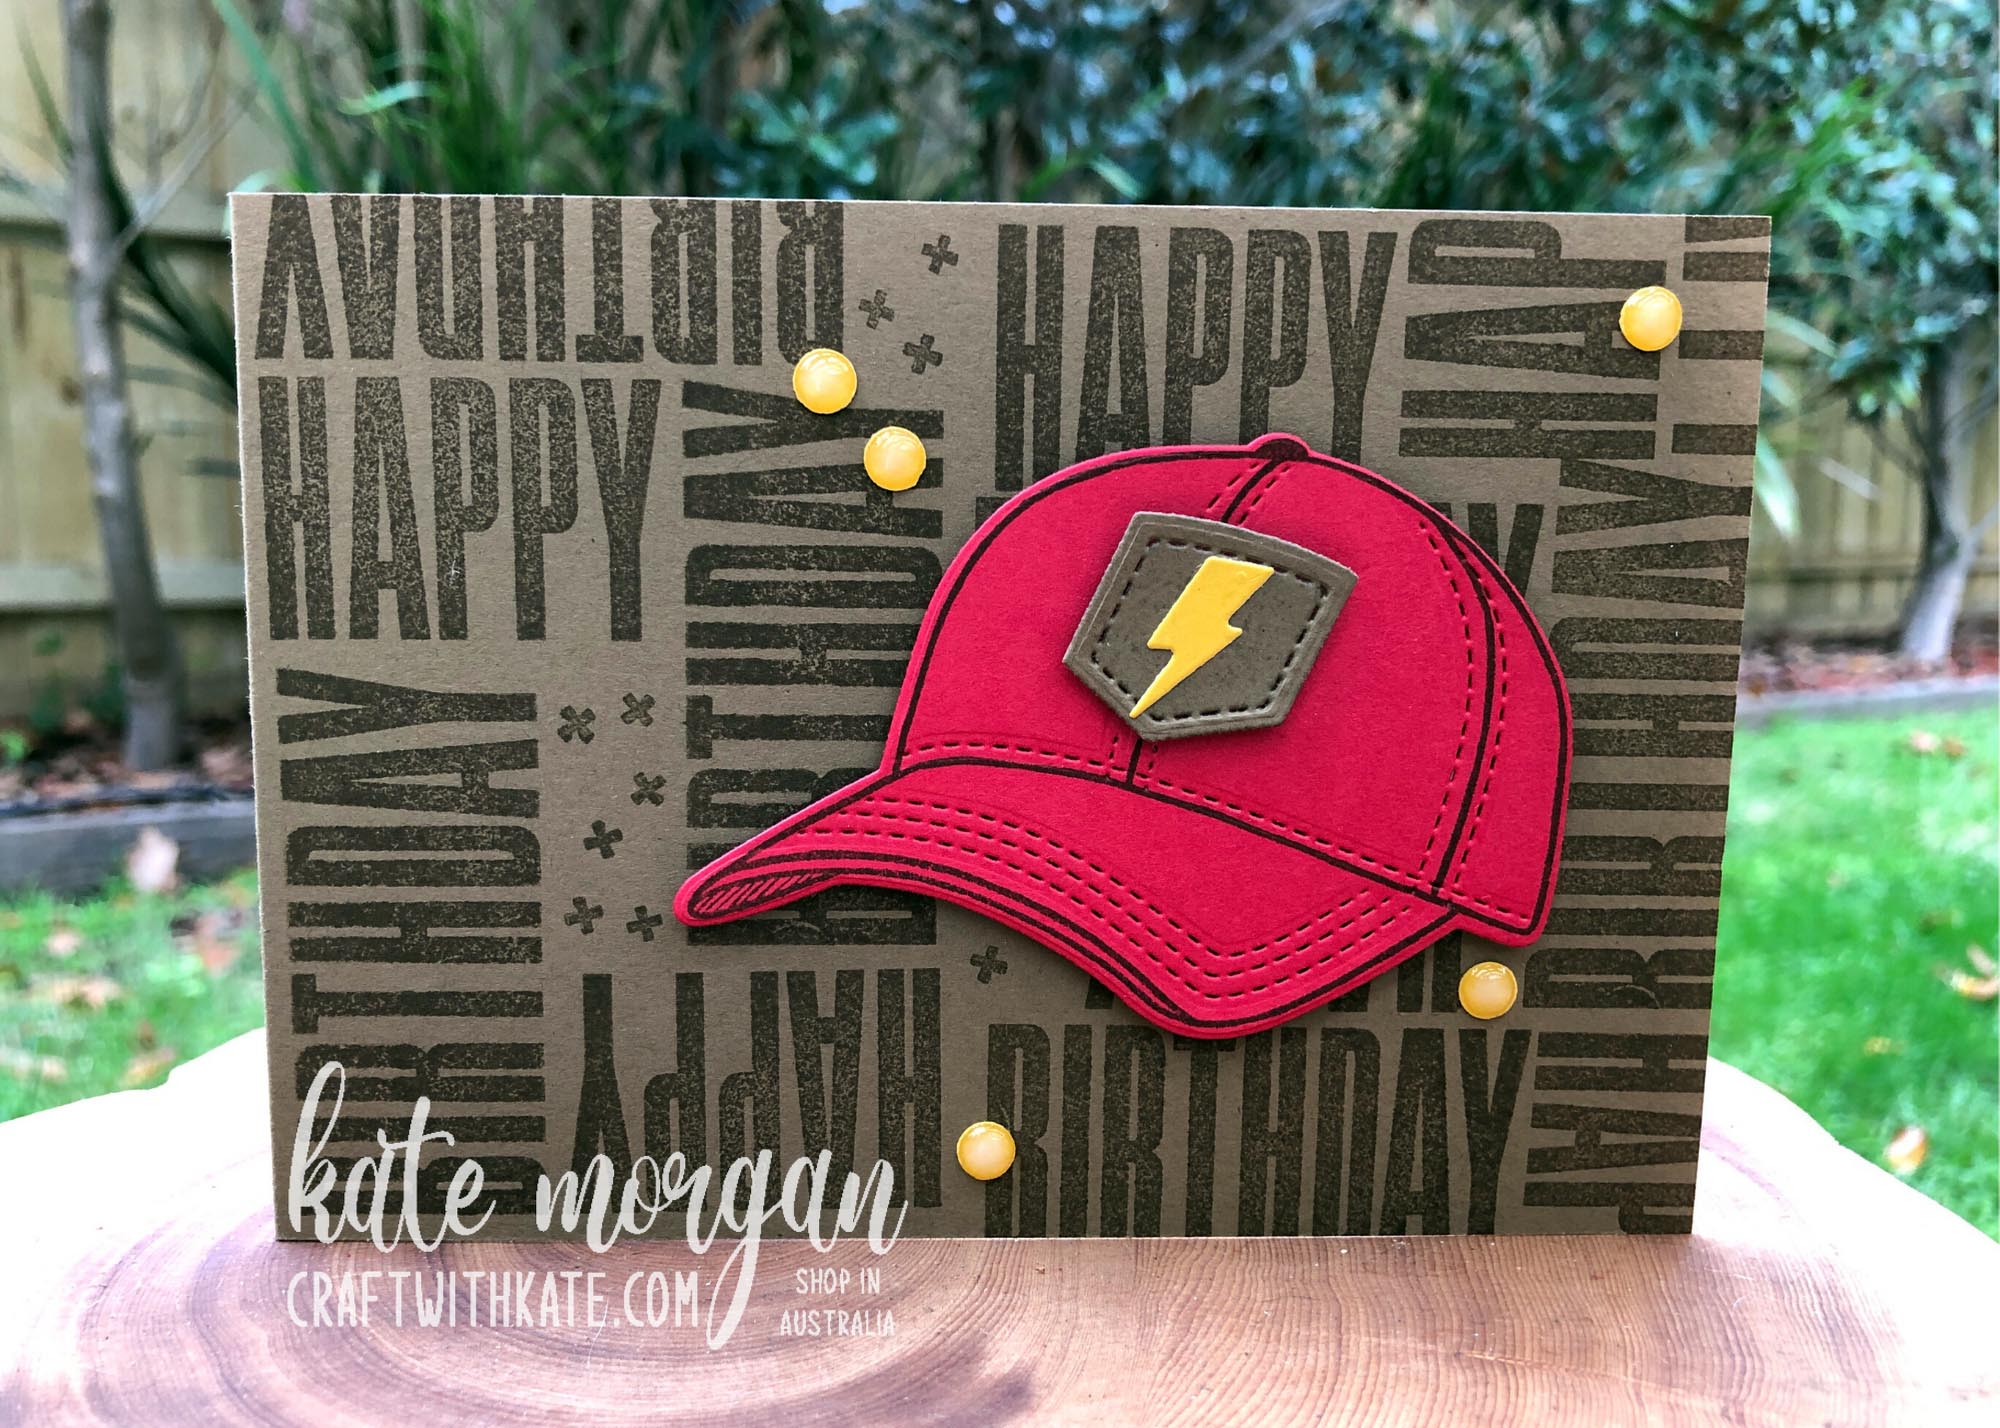 Hats Off &amp; Biggest Wish Stampin Up by Kate Morgan, Australia 2021 Colour Creations Showcase.